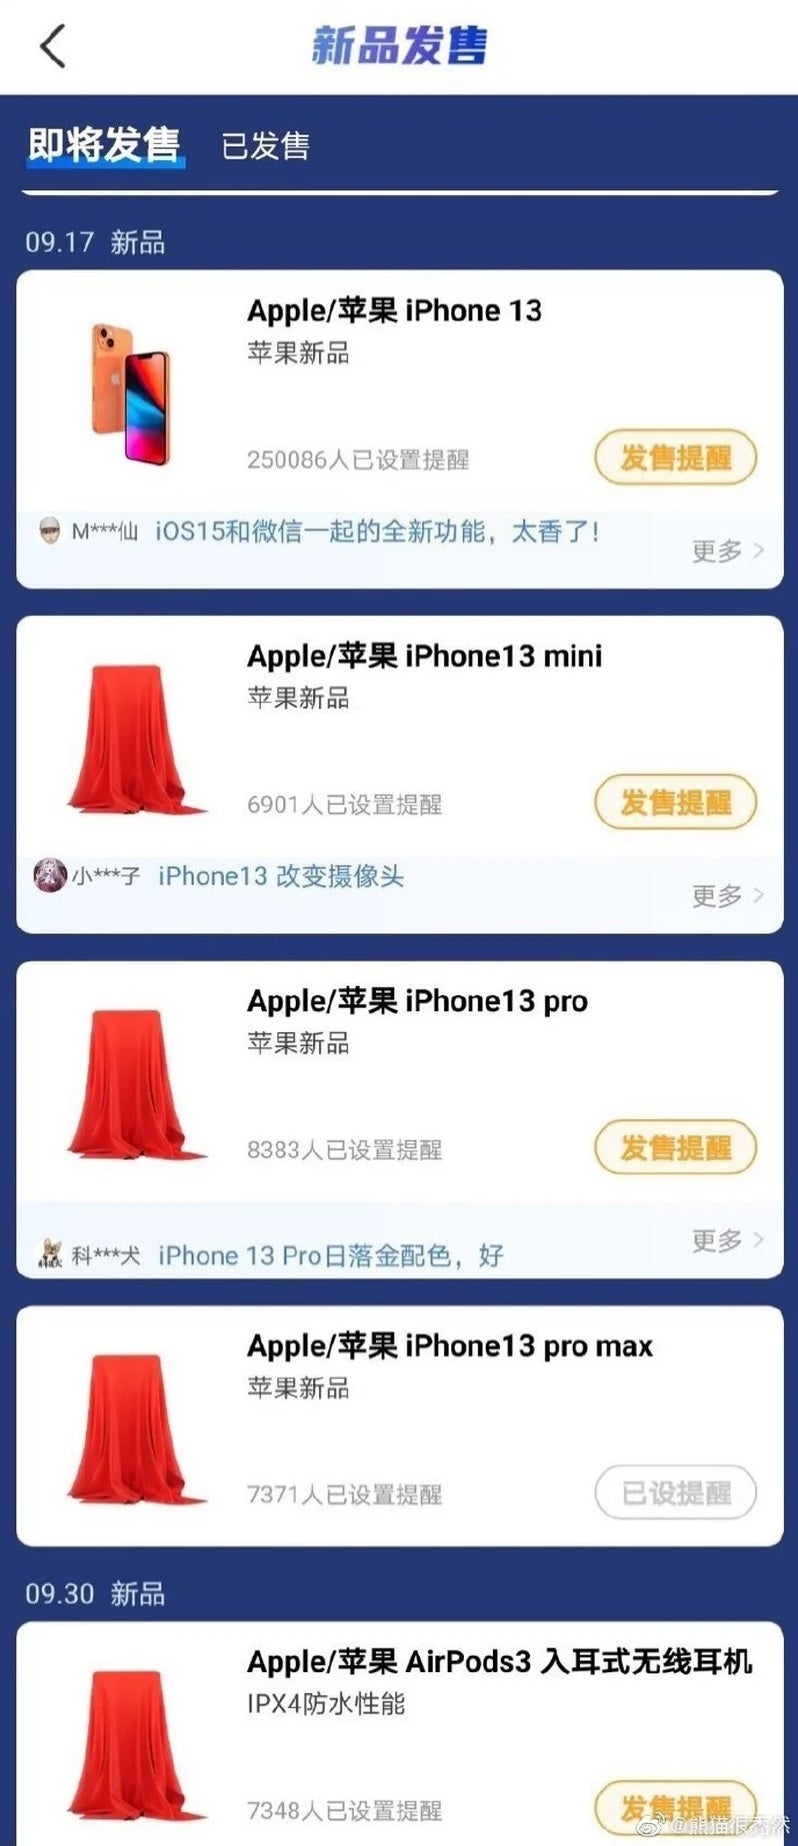 Screenshot that claims to reveal release date for the 2021 iPhone 13 line and the AirPods 3 - 5G Apple iPhone 13 line could be released on September 17th